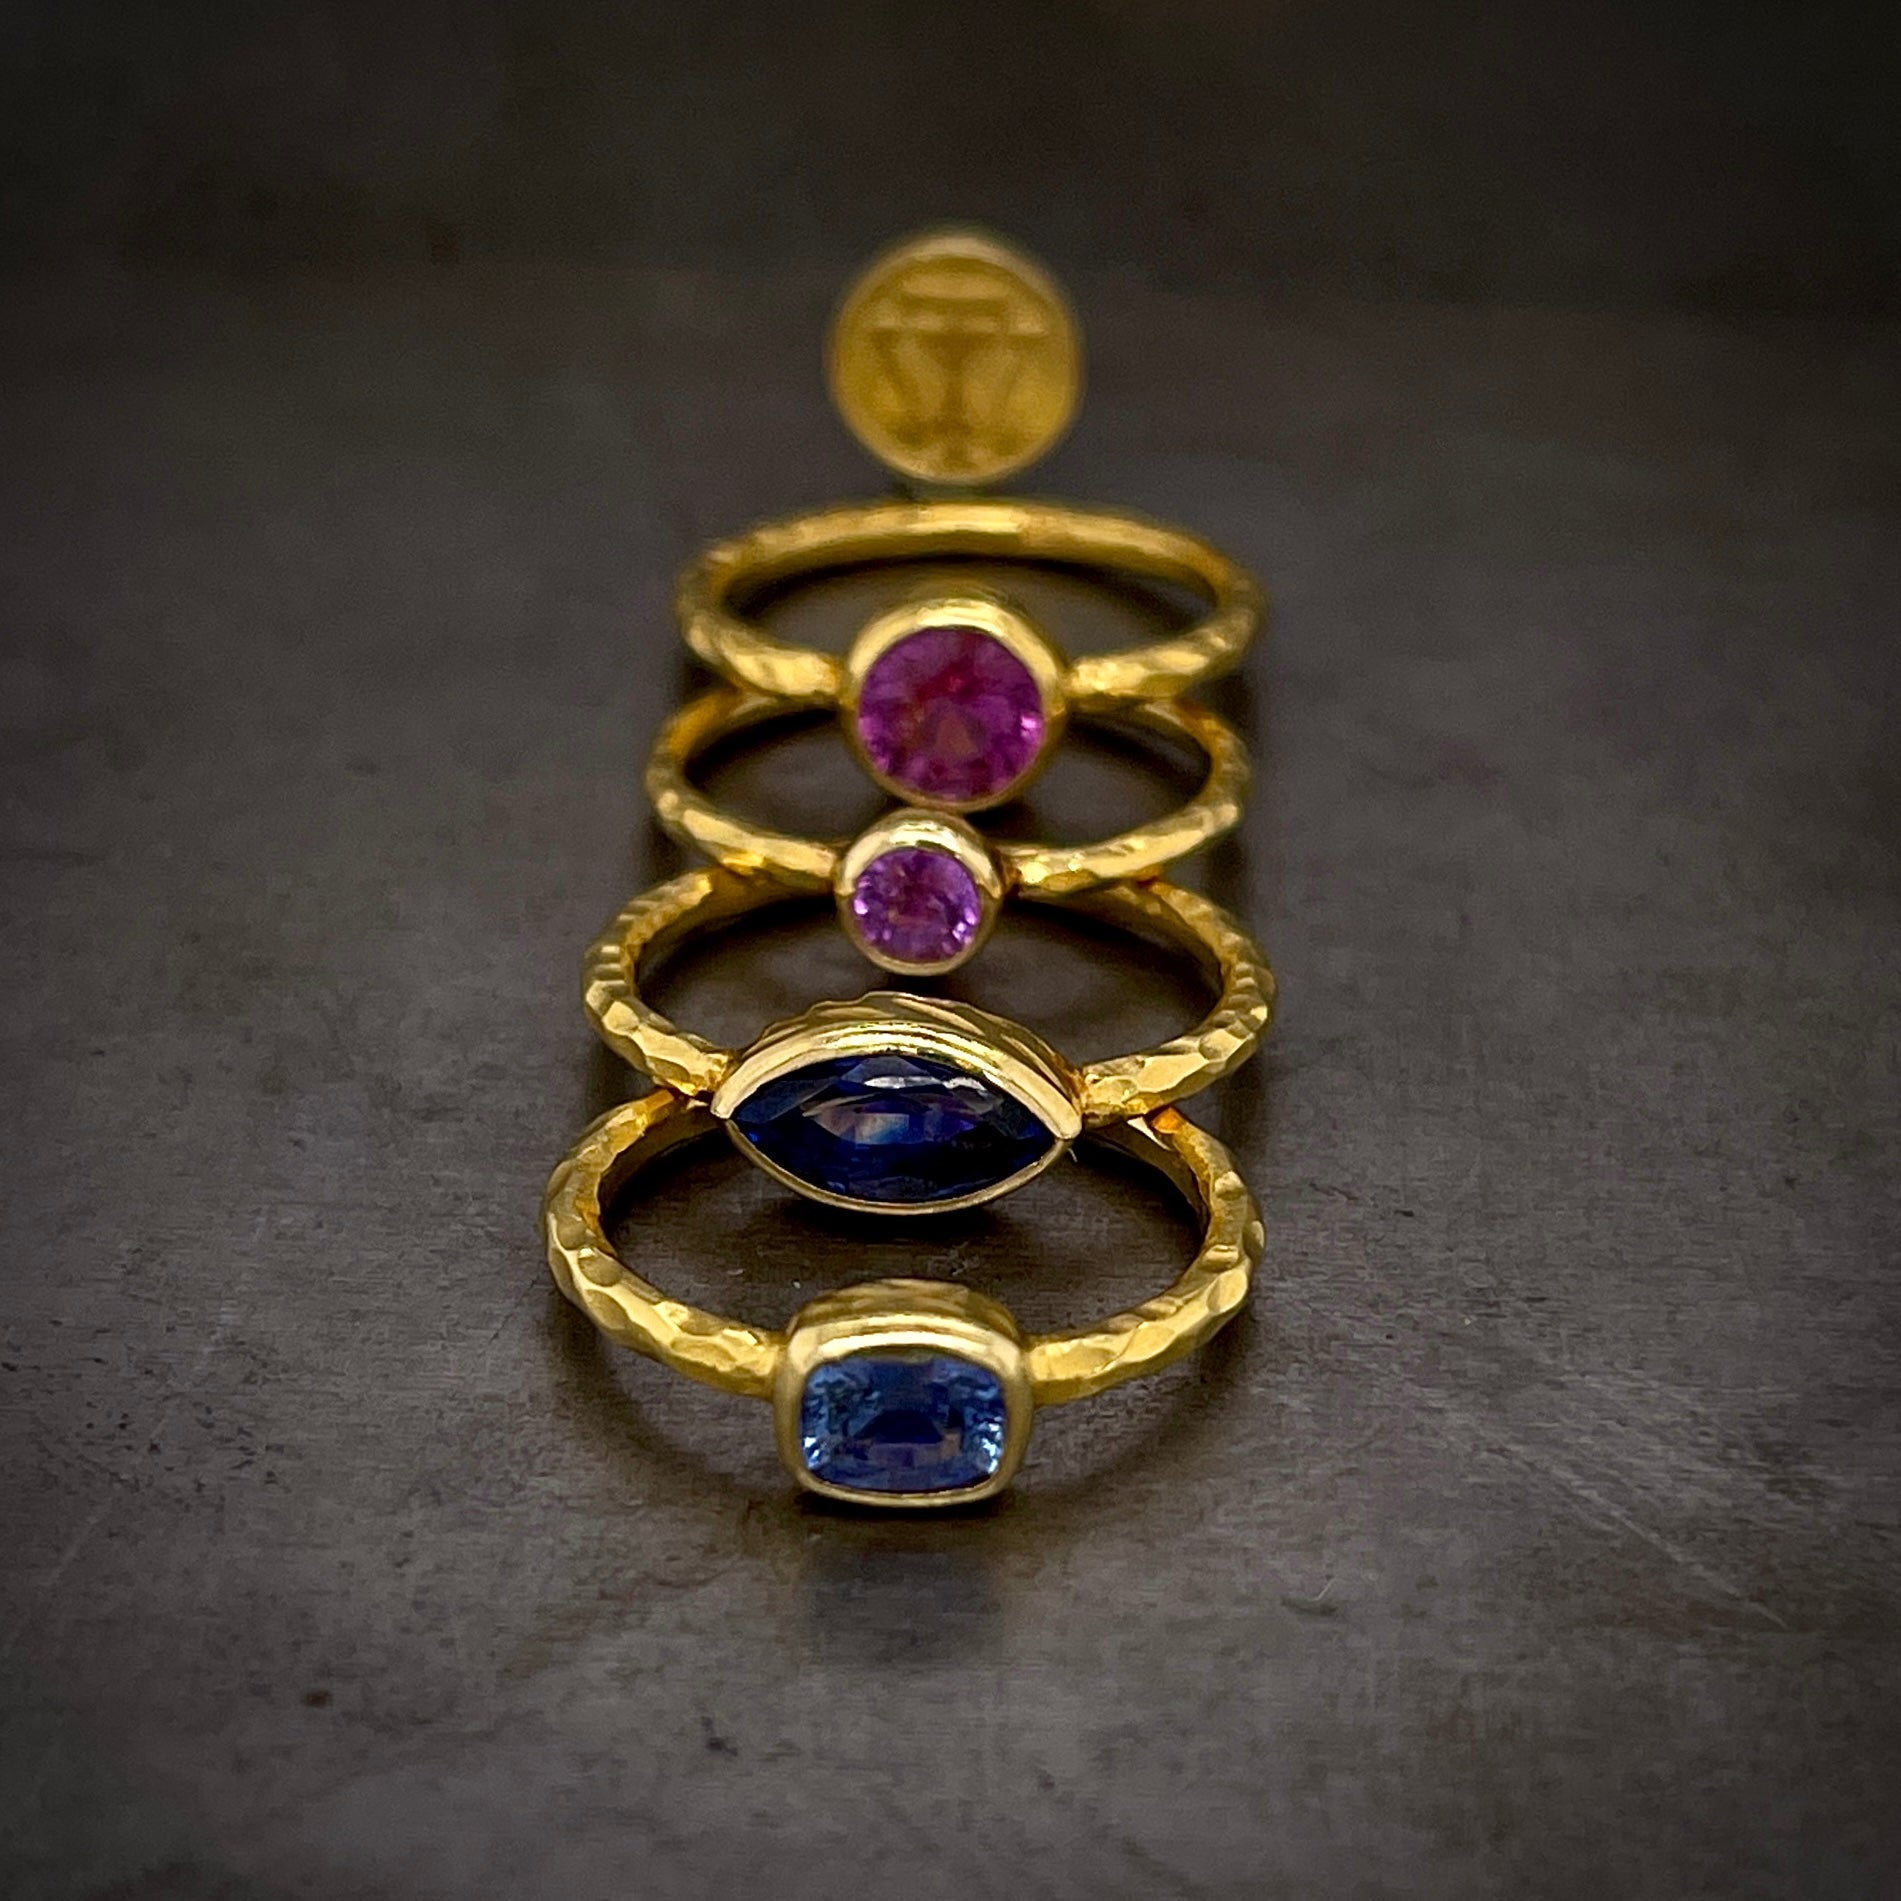 Four sapphire rings lay is a straight line with a WT gold coin in the background. The top right is the larger round pink sapphire, then the smaller lighter pink sapphire, the larger darker marquise and then the emerald cut light blue sapphire.